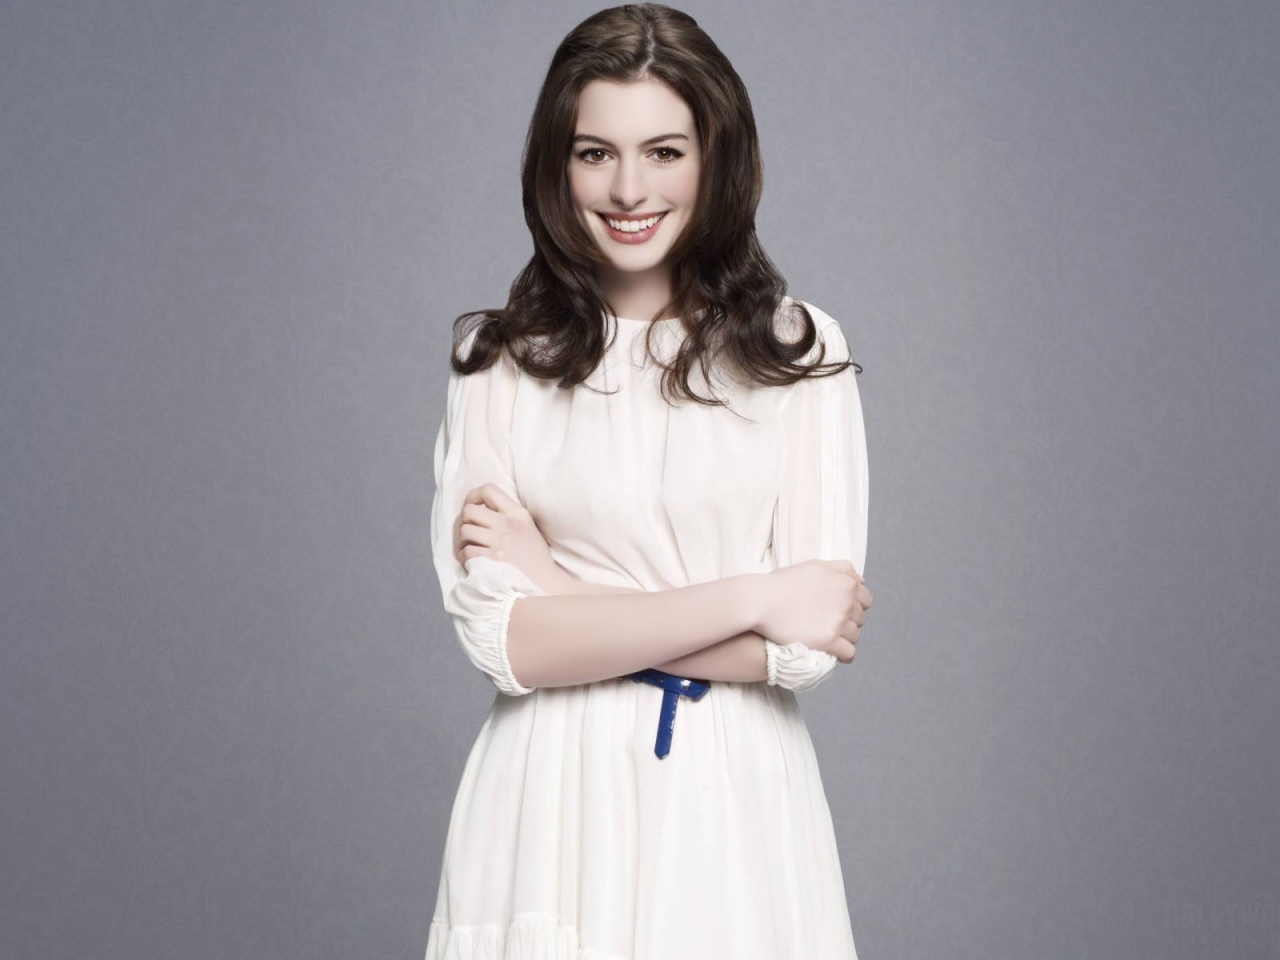 Cute Anne Hathaway for 1280 x 960 resolution